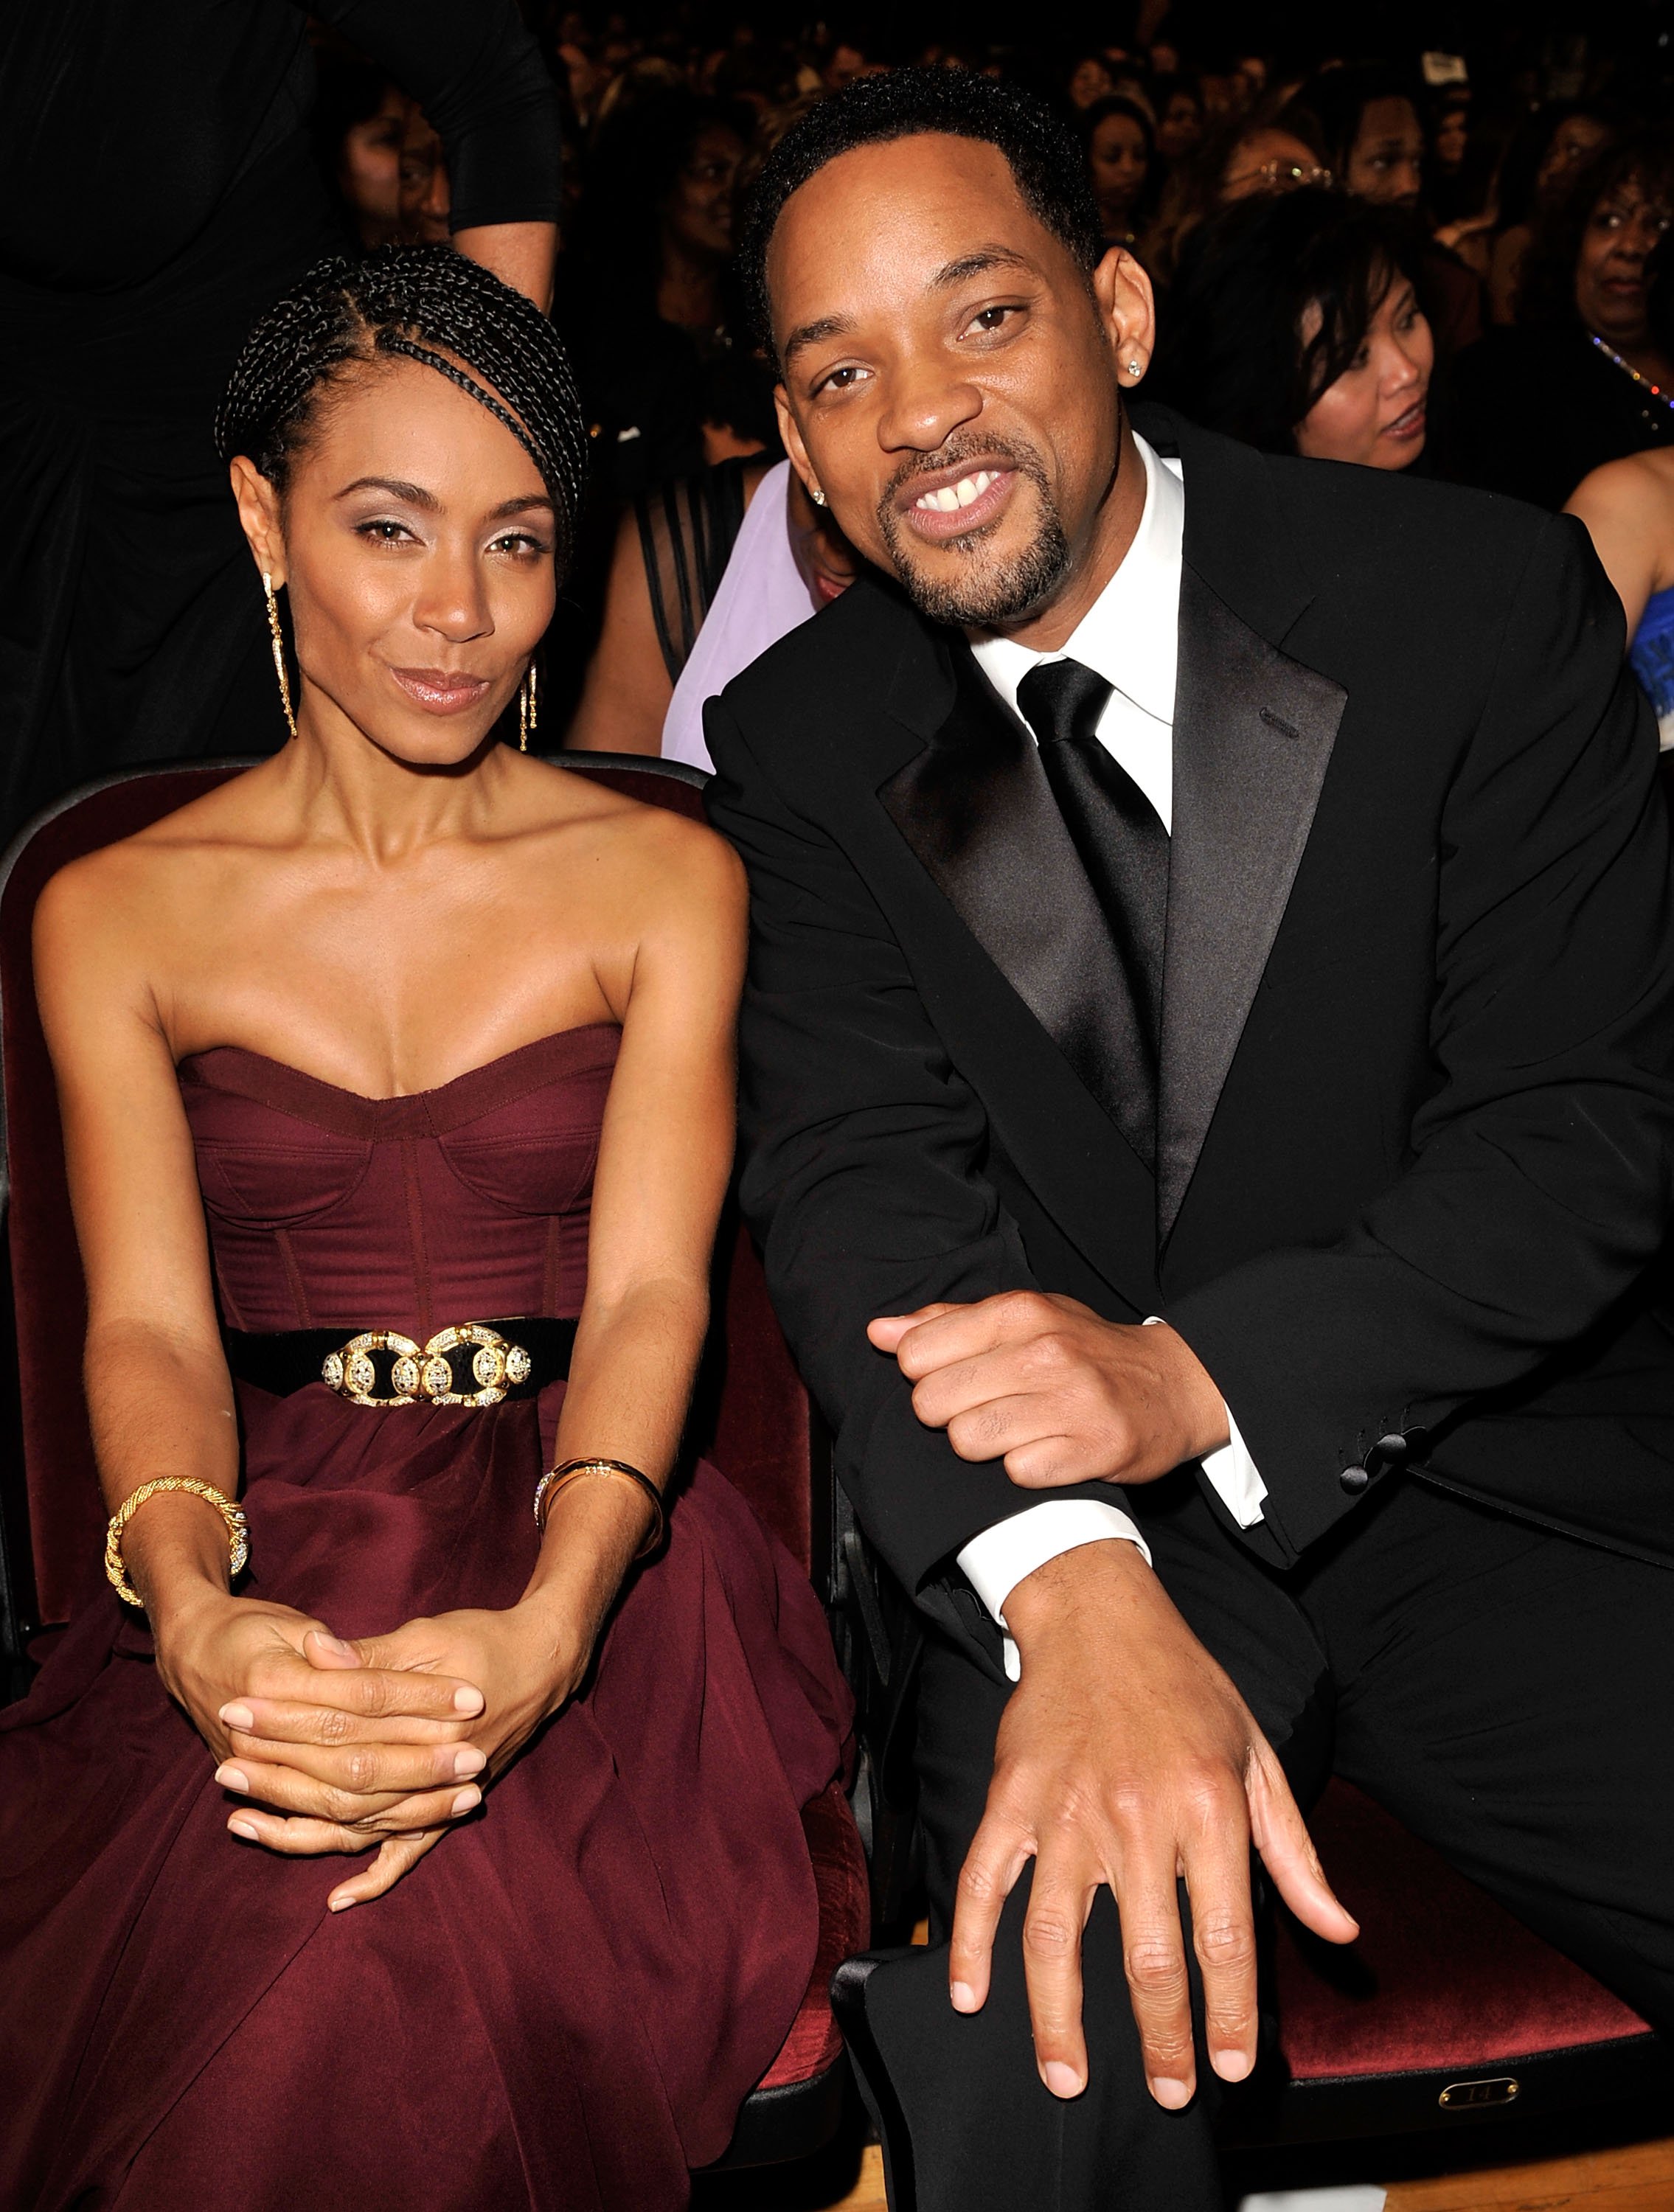 Jada Pinkett Smith & Will Smith at the 40th NAACP Image Awards on Feb. 12, 2009 in California | Photo: Getty Images